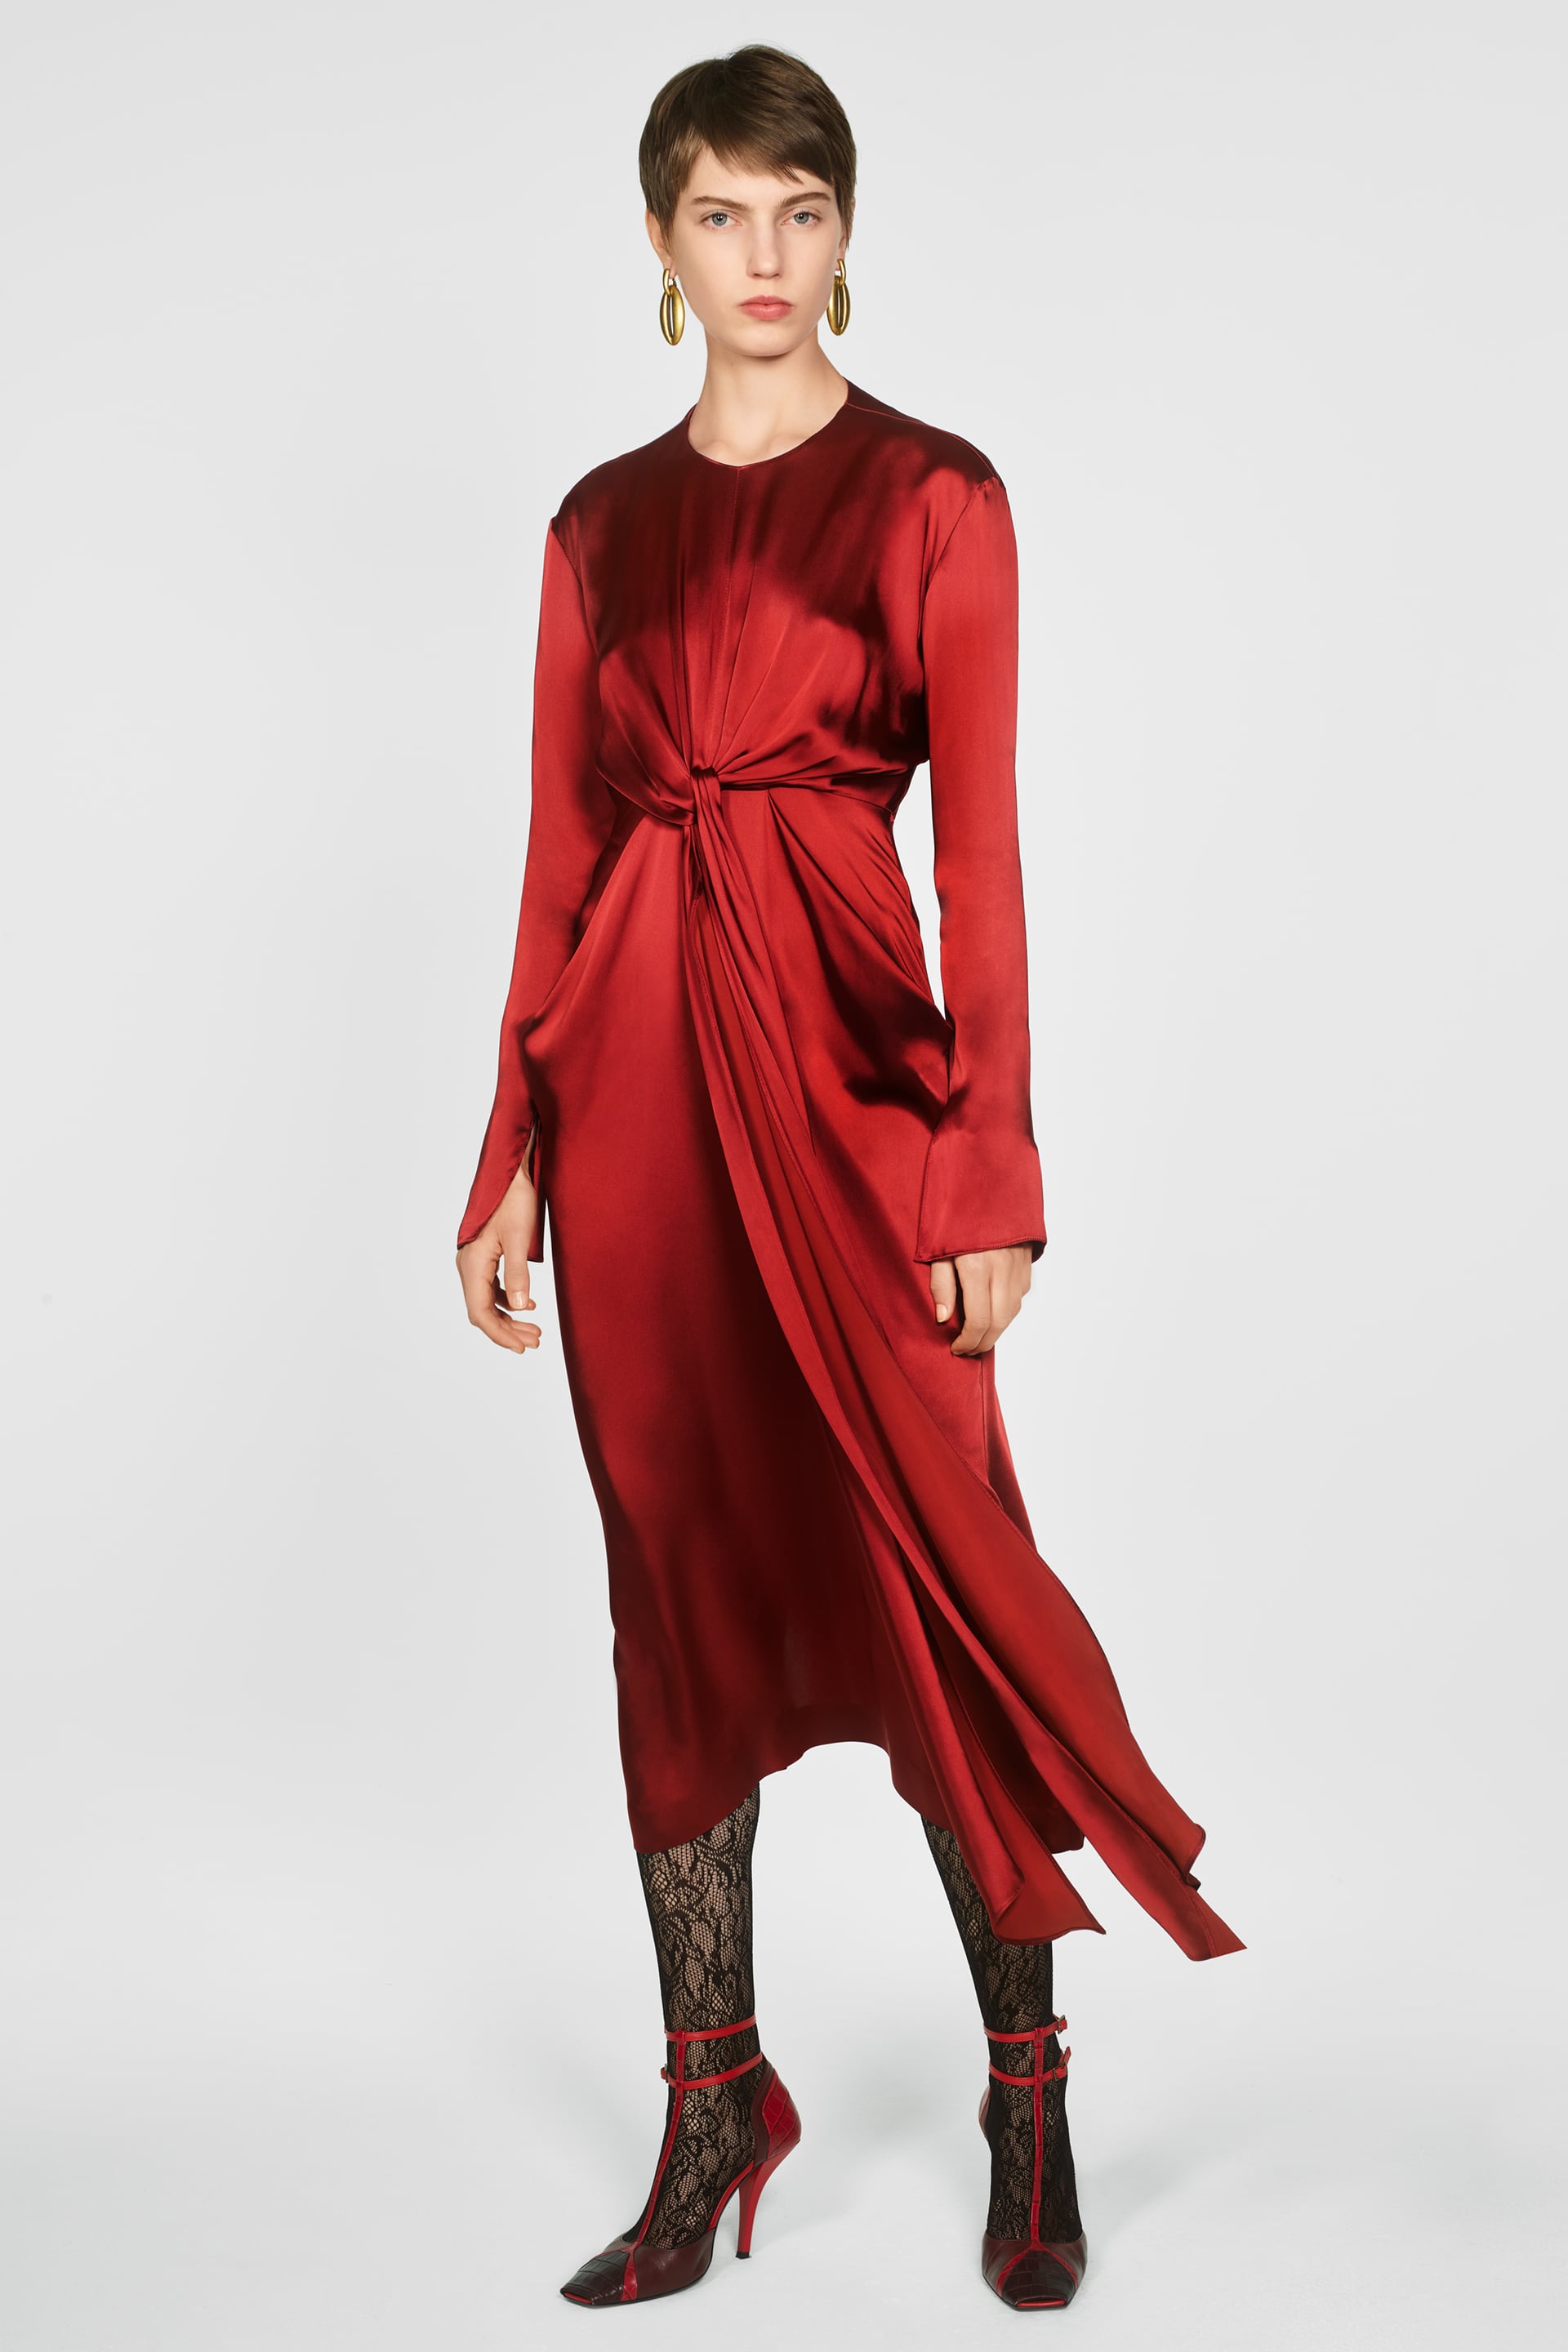 zara new collection dresses